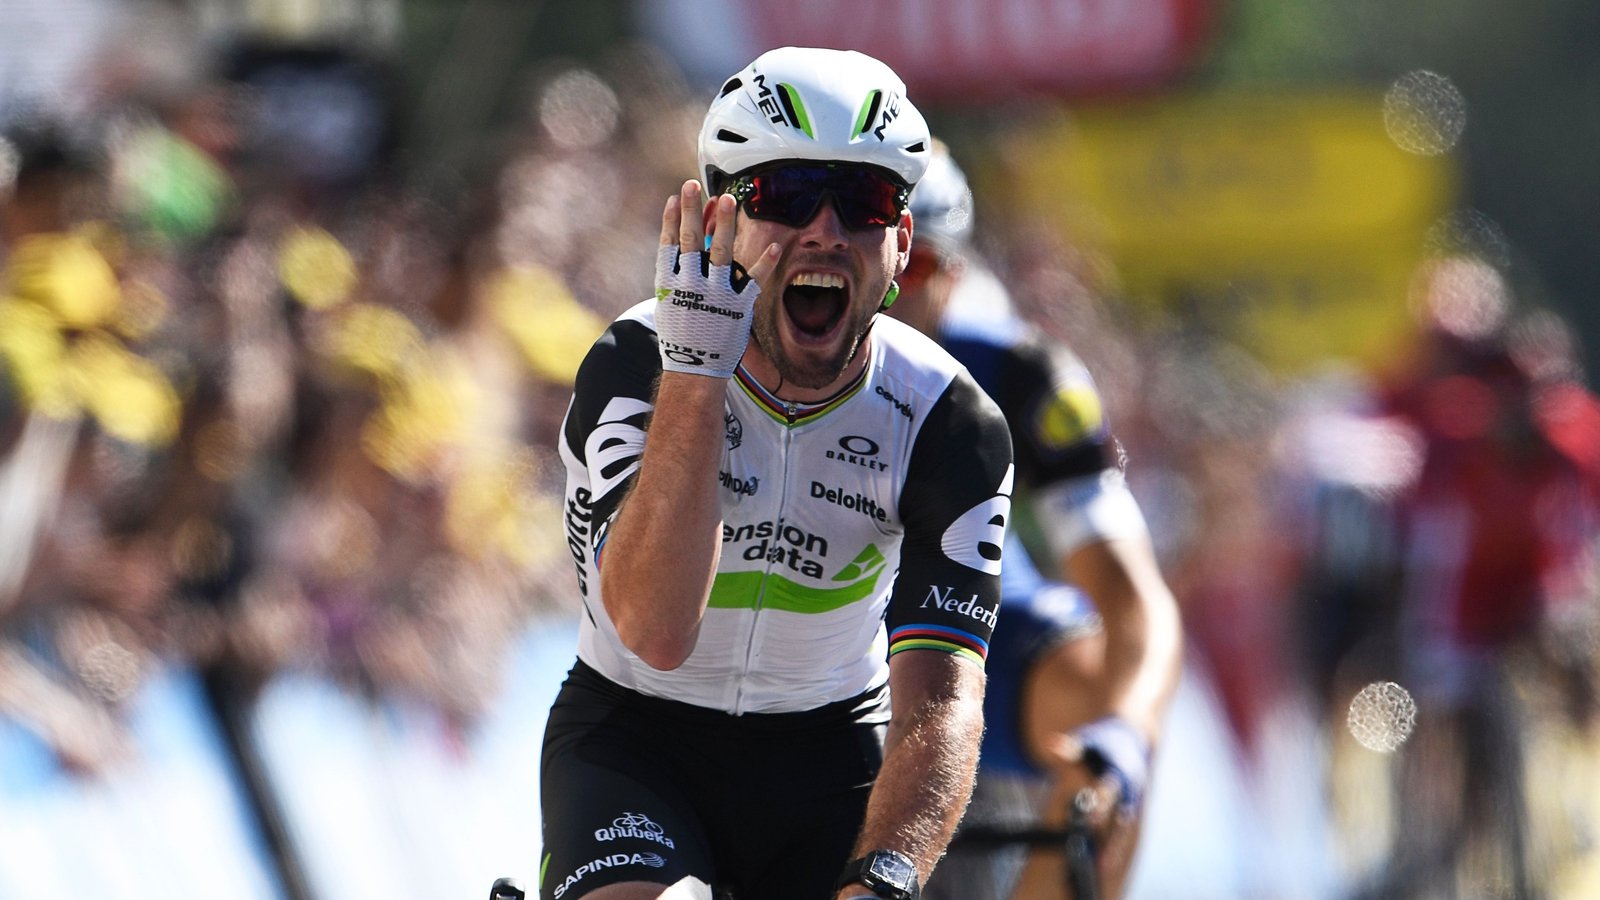 Cavendish claims 30th Tour stage win